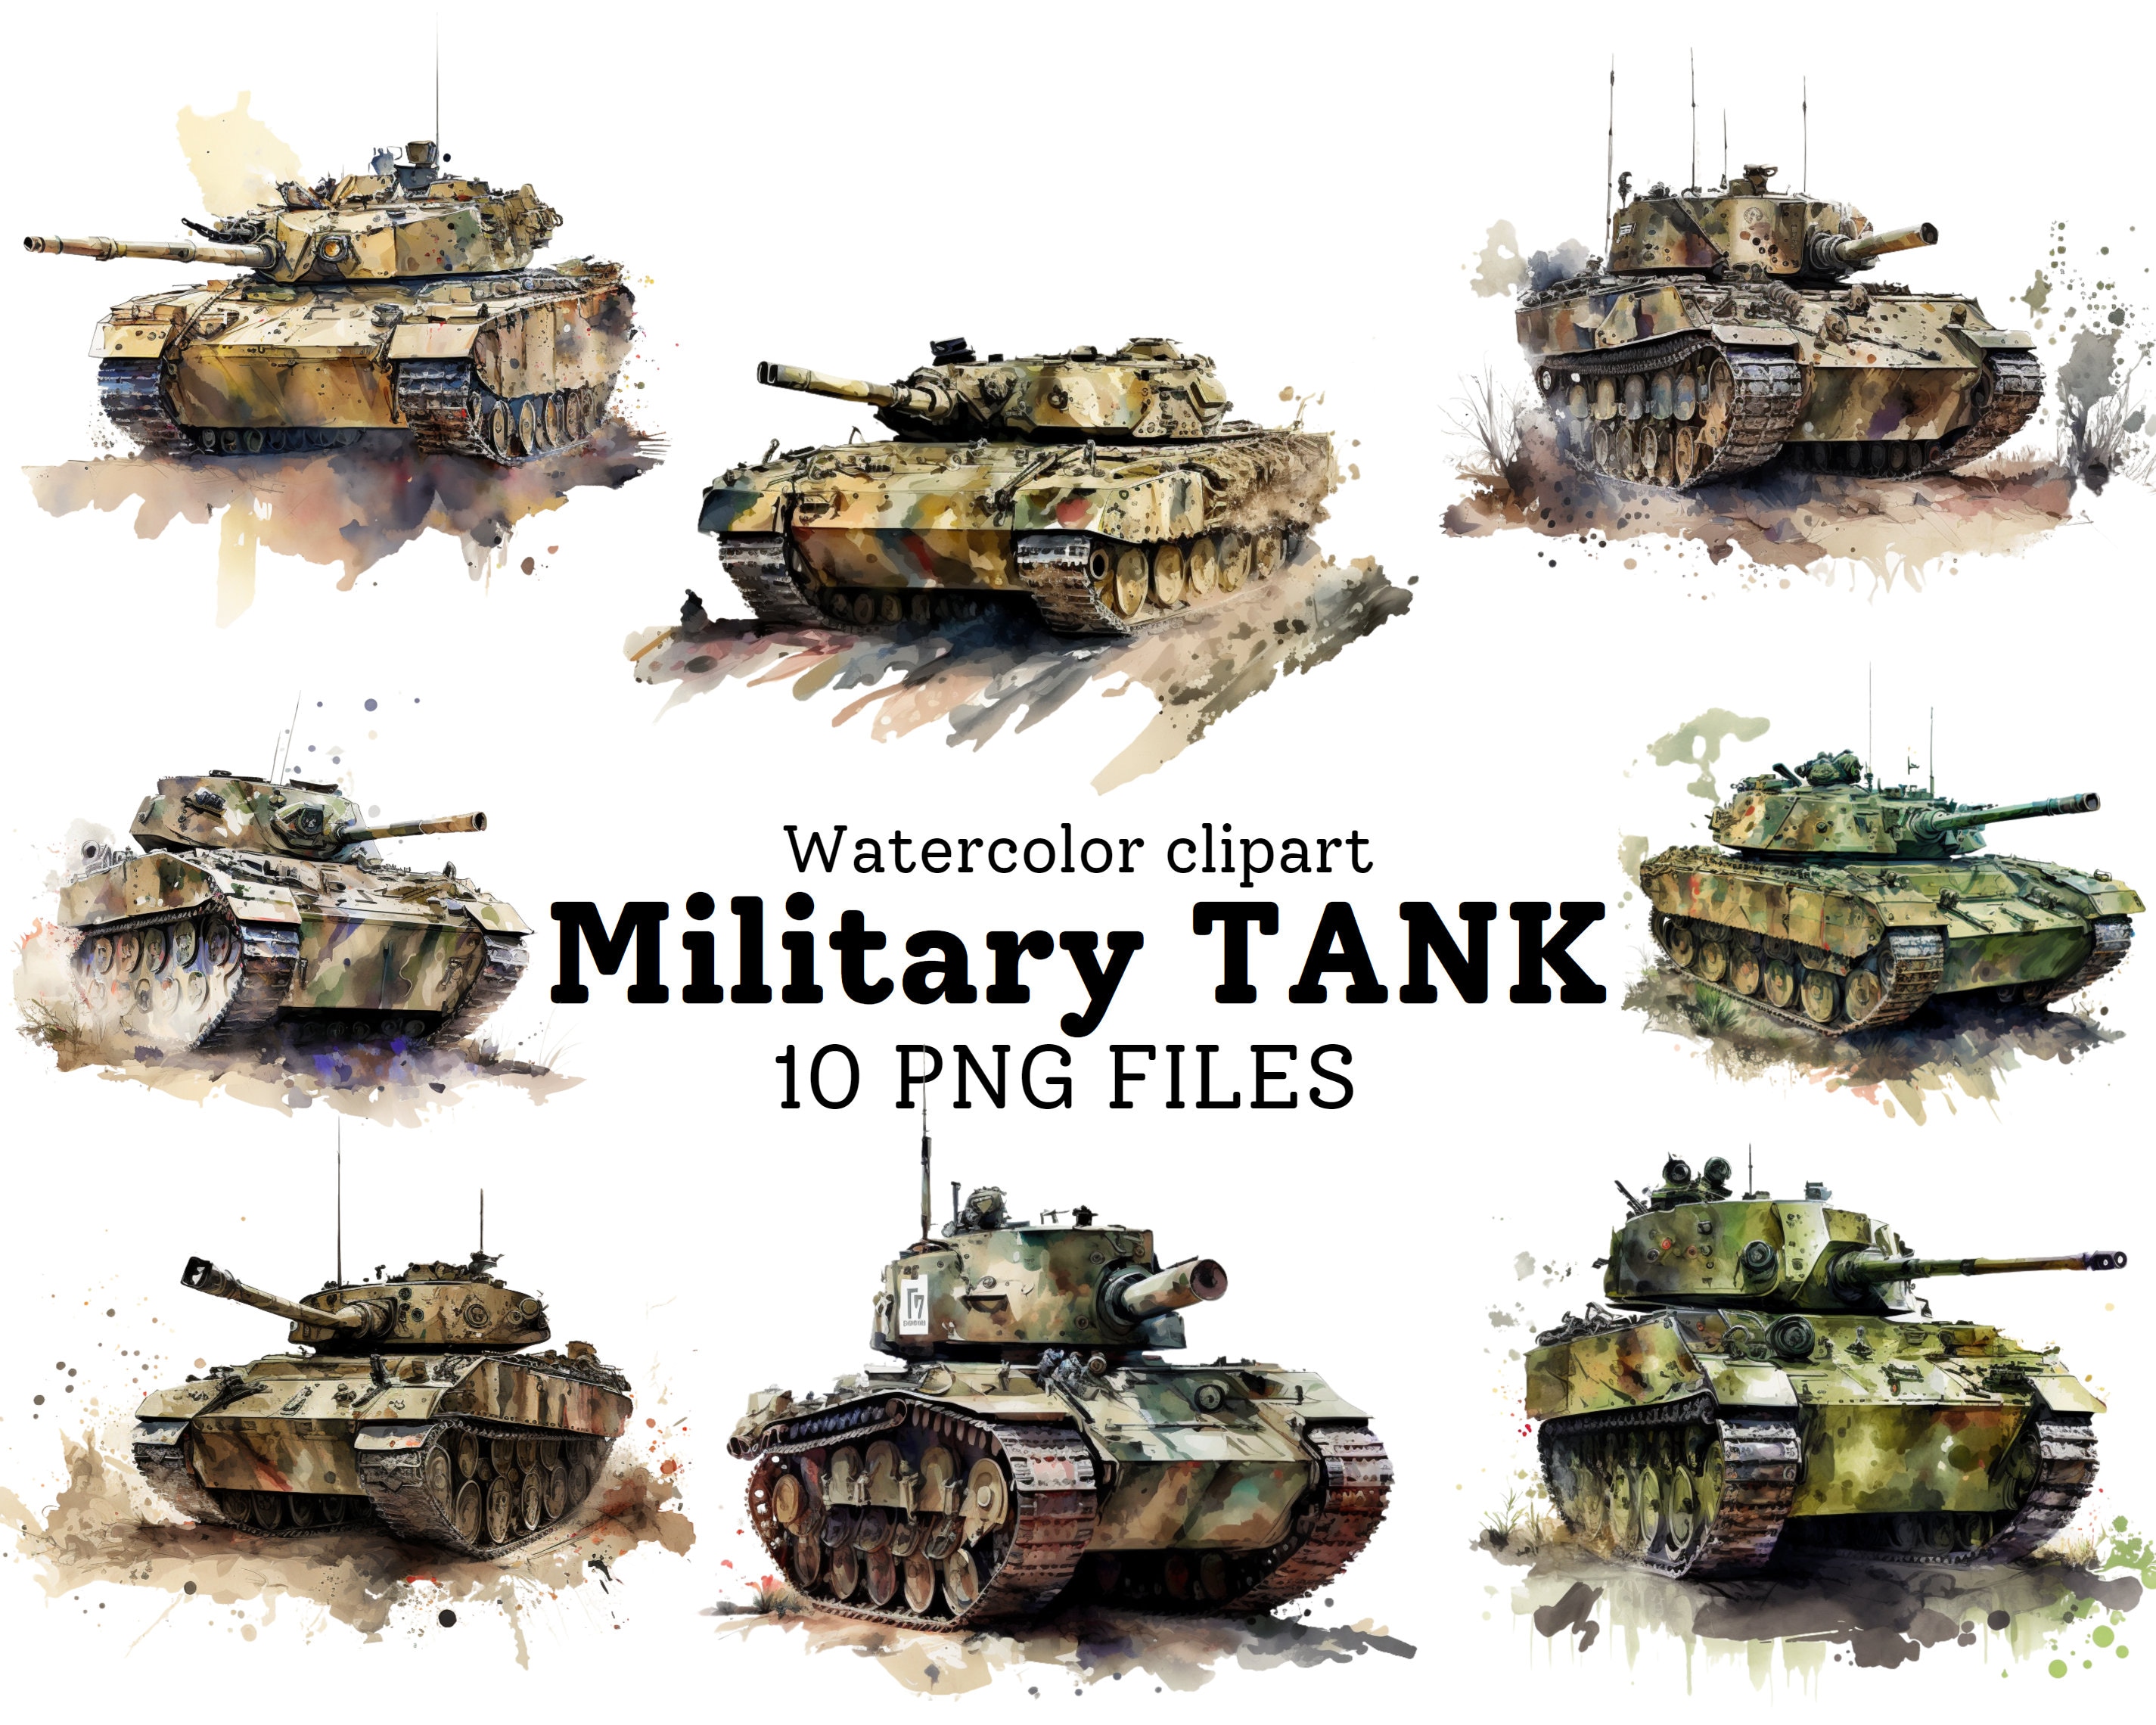 877 Army Tank Clip Art Images, Stock Photos, 3D objects, & Vectors